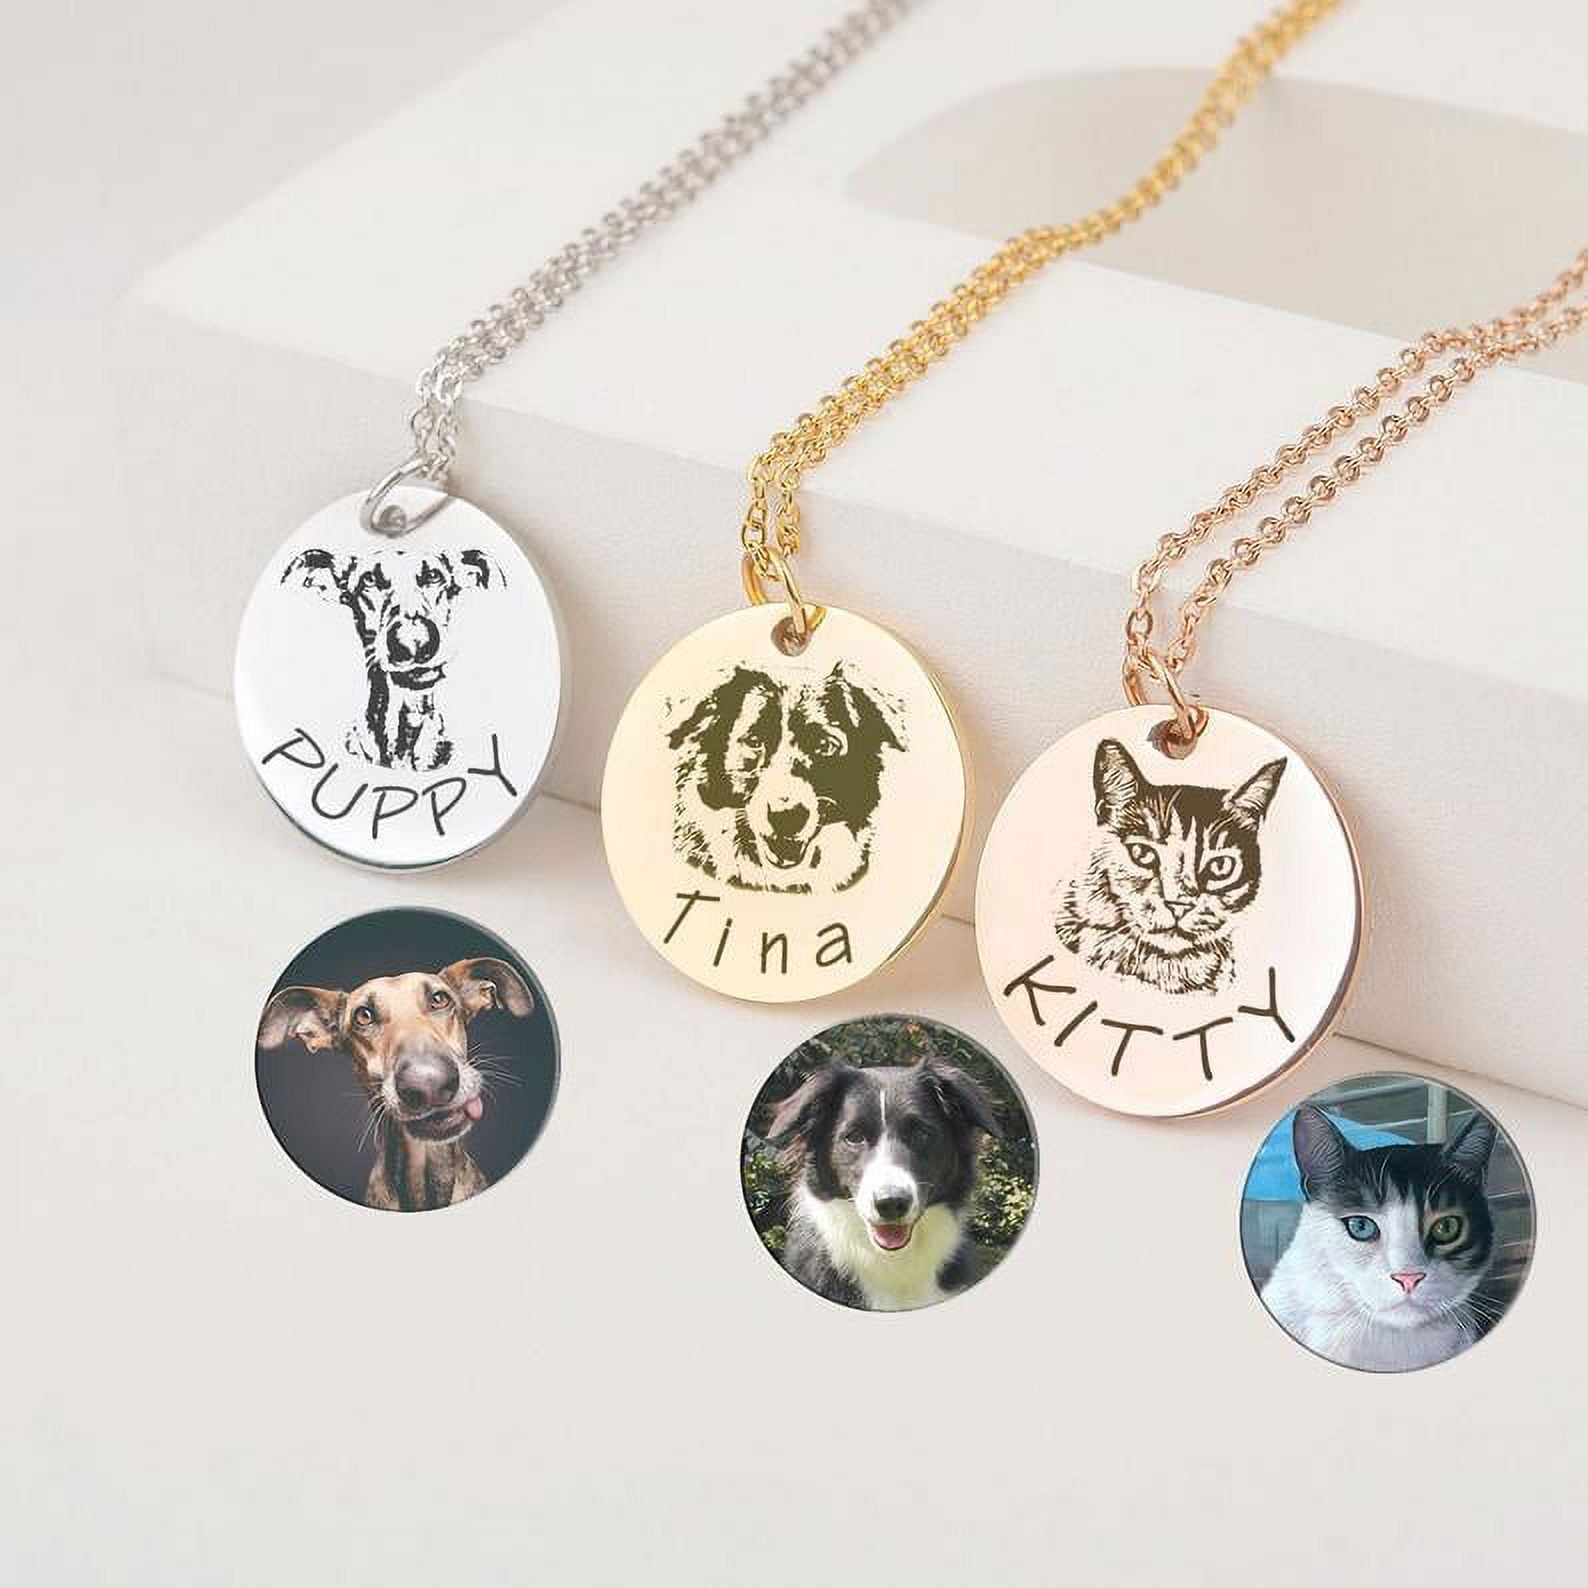 Personalized Dog Portriat Round Necklace Rose Gold Stainless Steel Engravable Pet Cat Portrait Mother s Day Gift Her Jewelry Box 8a993ca9 03a6 411c bfe5 ce6e913ea0b8.85624b1b12724e1088079dd67d51ea8e